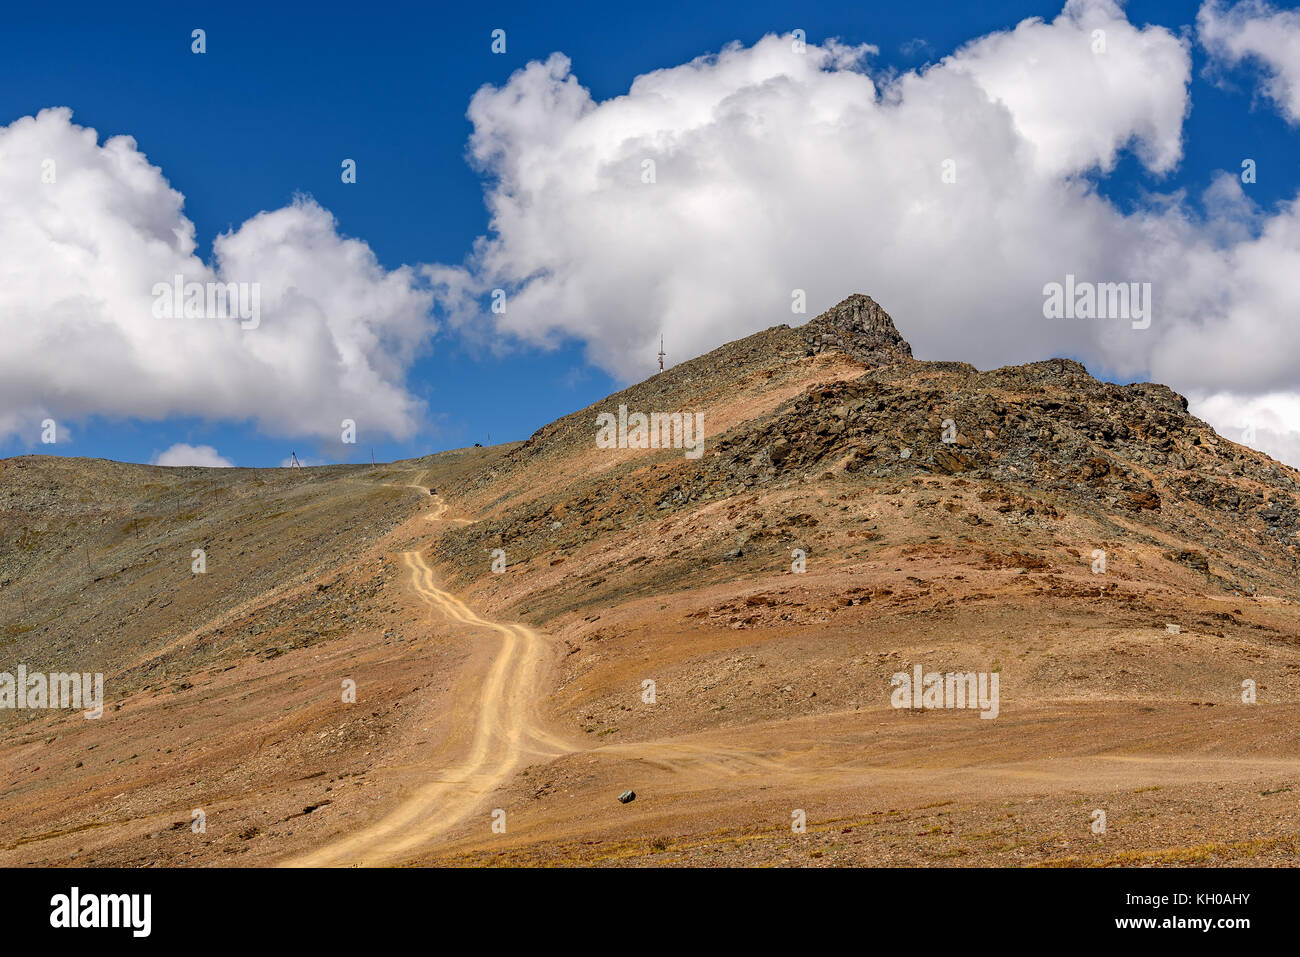 Scenic view with the winding gravel road to the top of the mountain on a background of blue sky and clouds on a sunny day Stock Photo